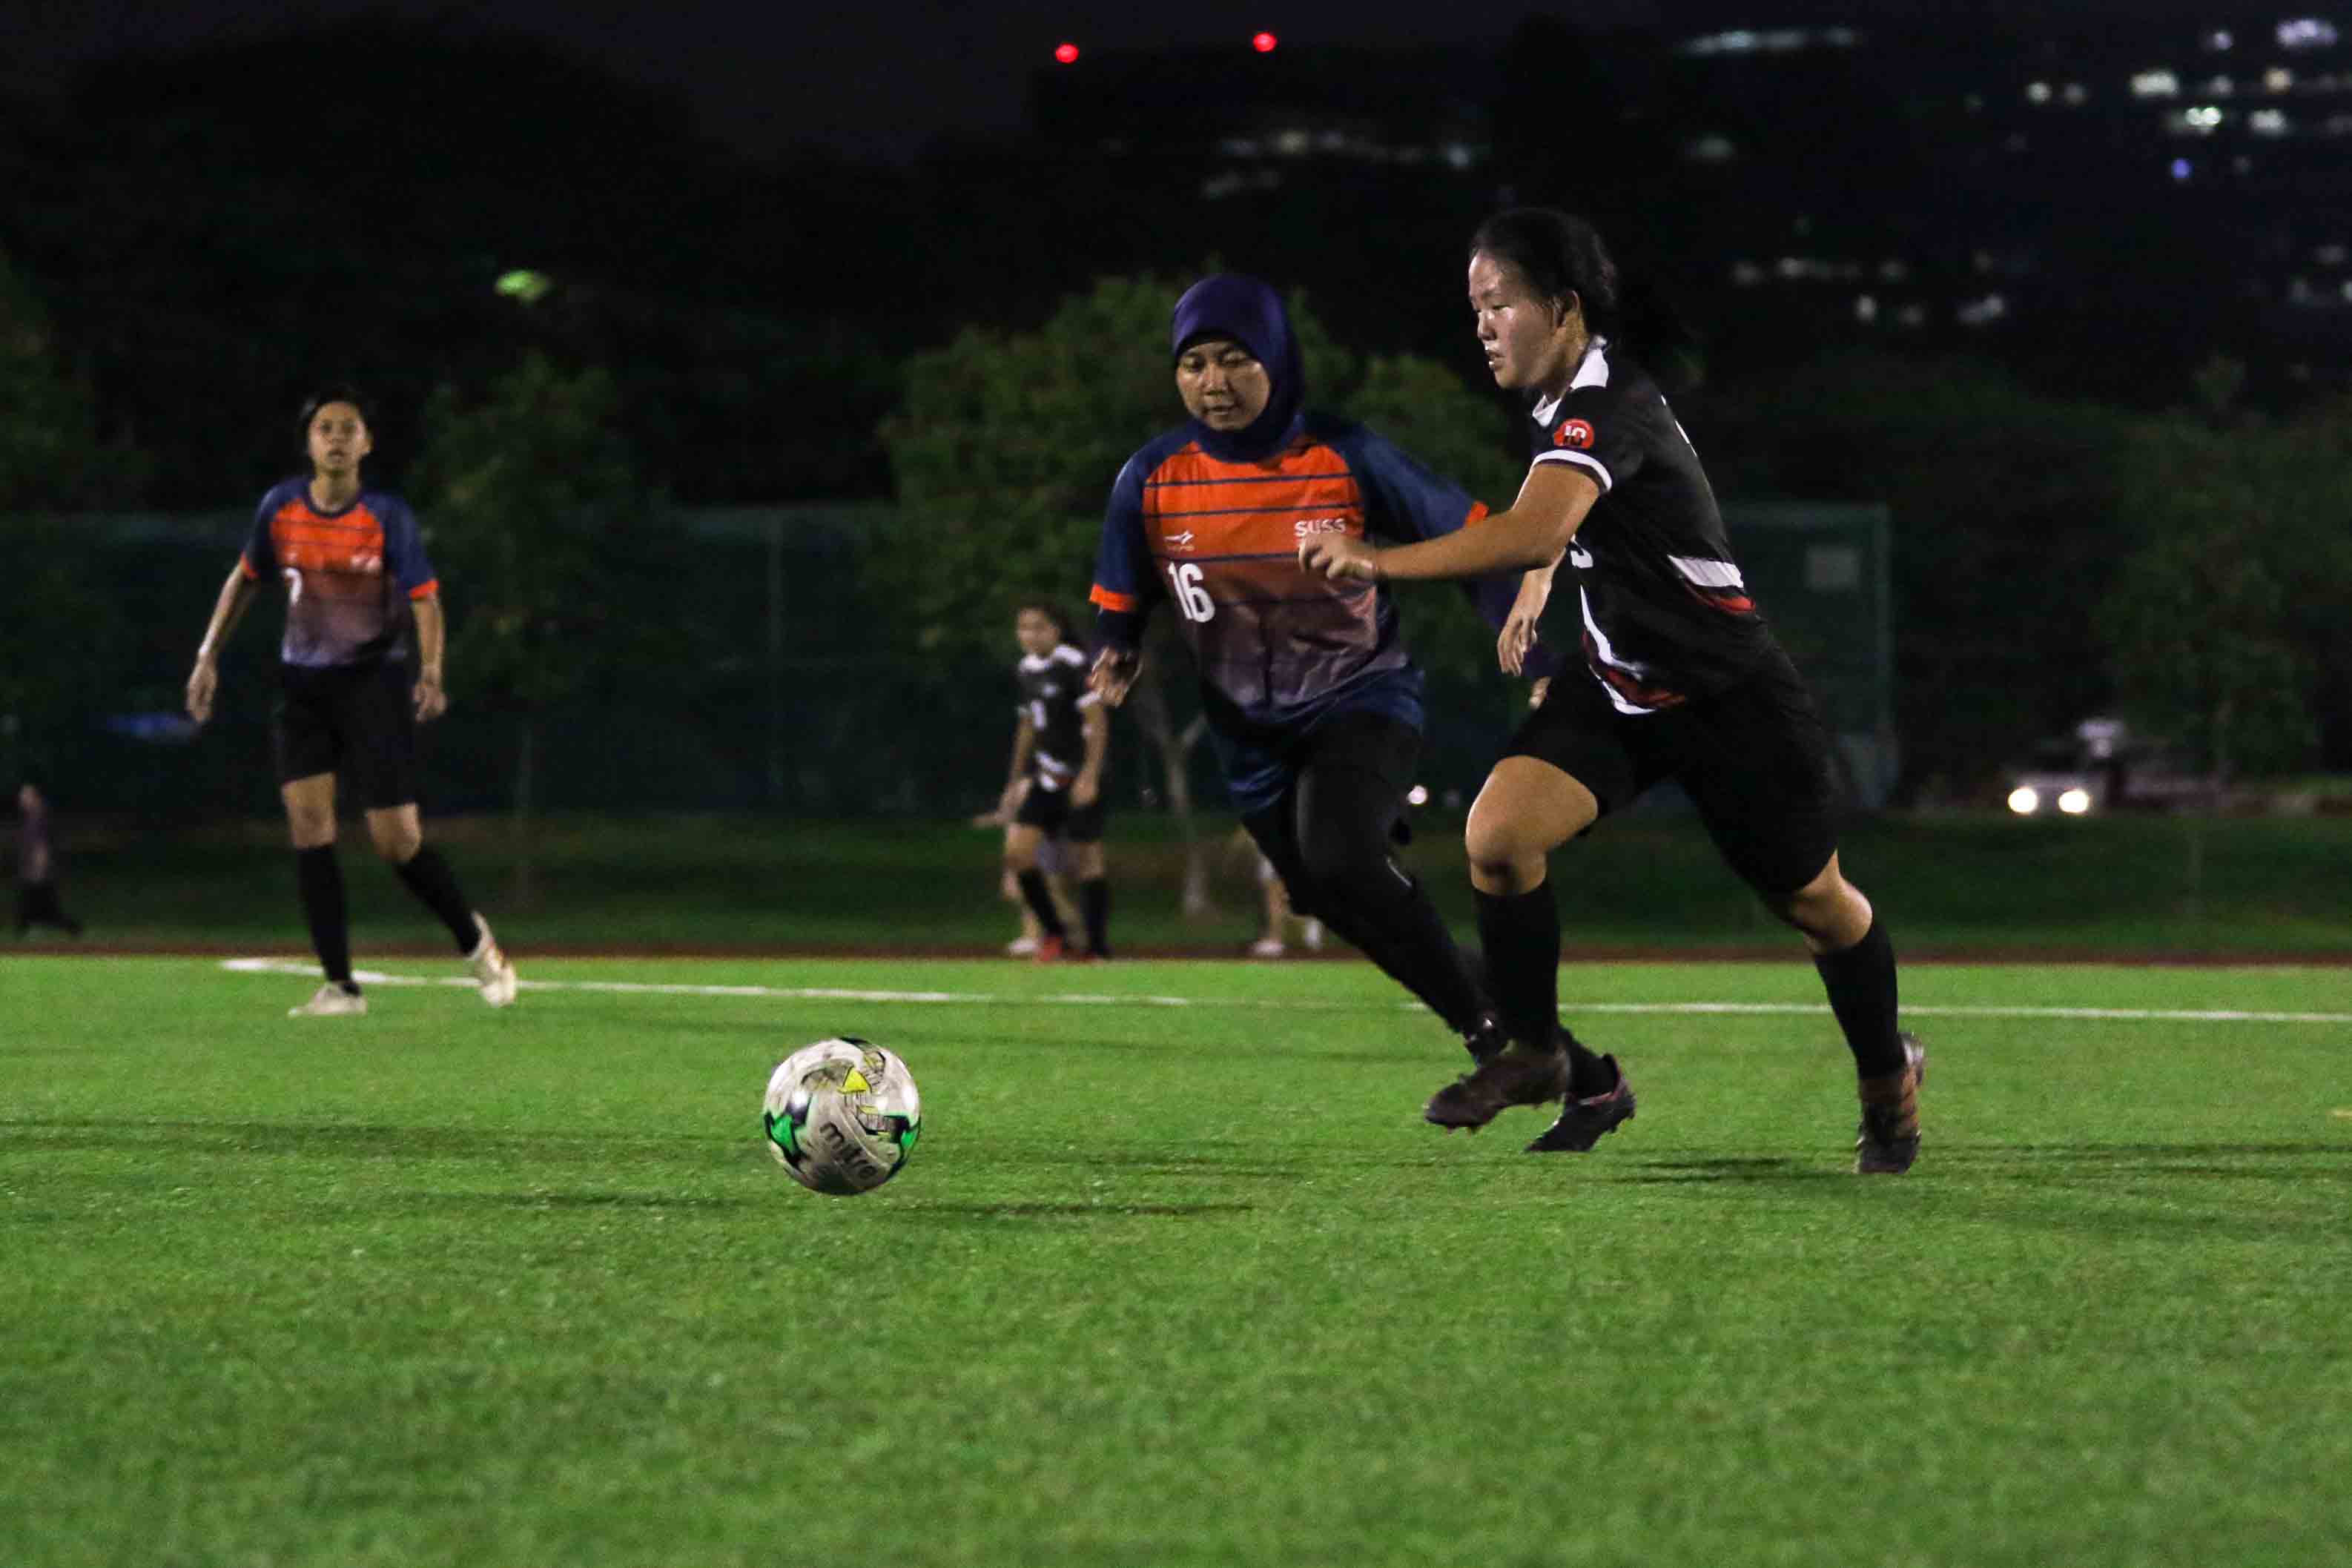 Winette Lim (SIT #13) attempts to dribble the ball past Izzati Safwanah (SUSS #16). (Photo 3 © Clara Lau/Red Sports)